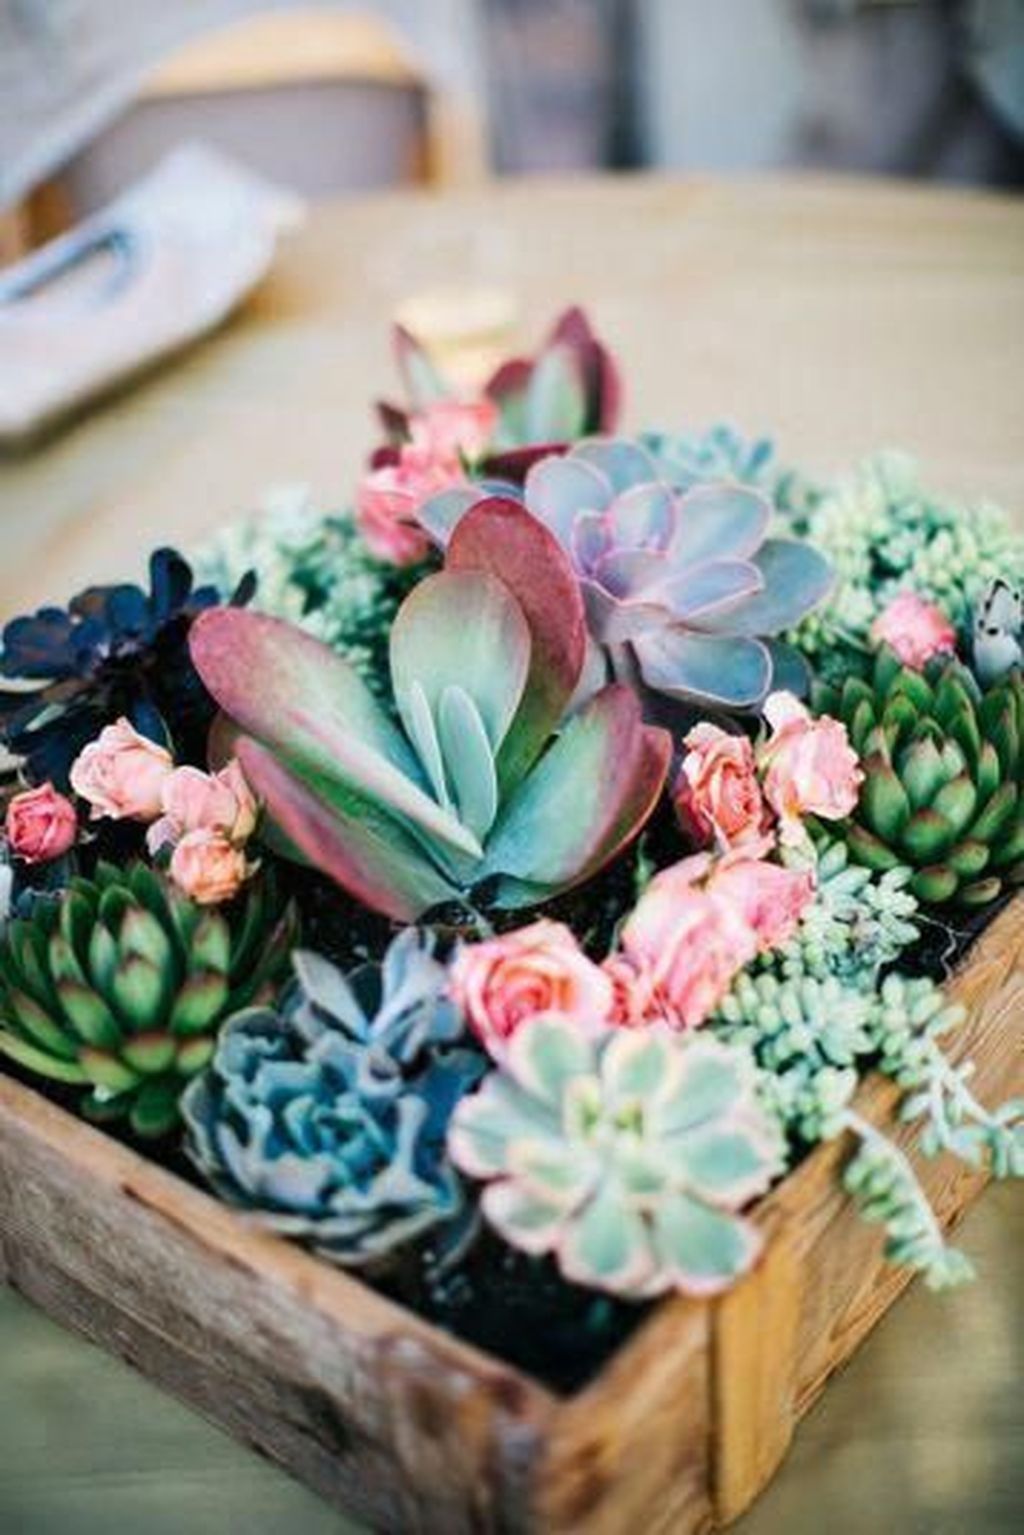 40+ Magnificient Succulent Plants Ideas For Indoor And Outdoor In Apartment -   8 plants Aesthetic succulents ideas